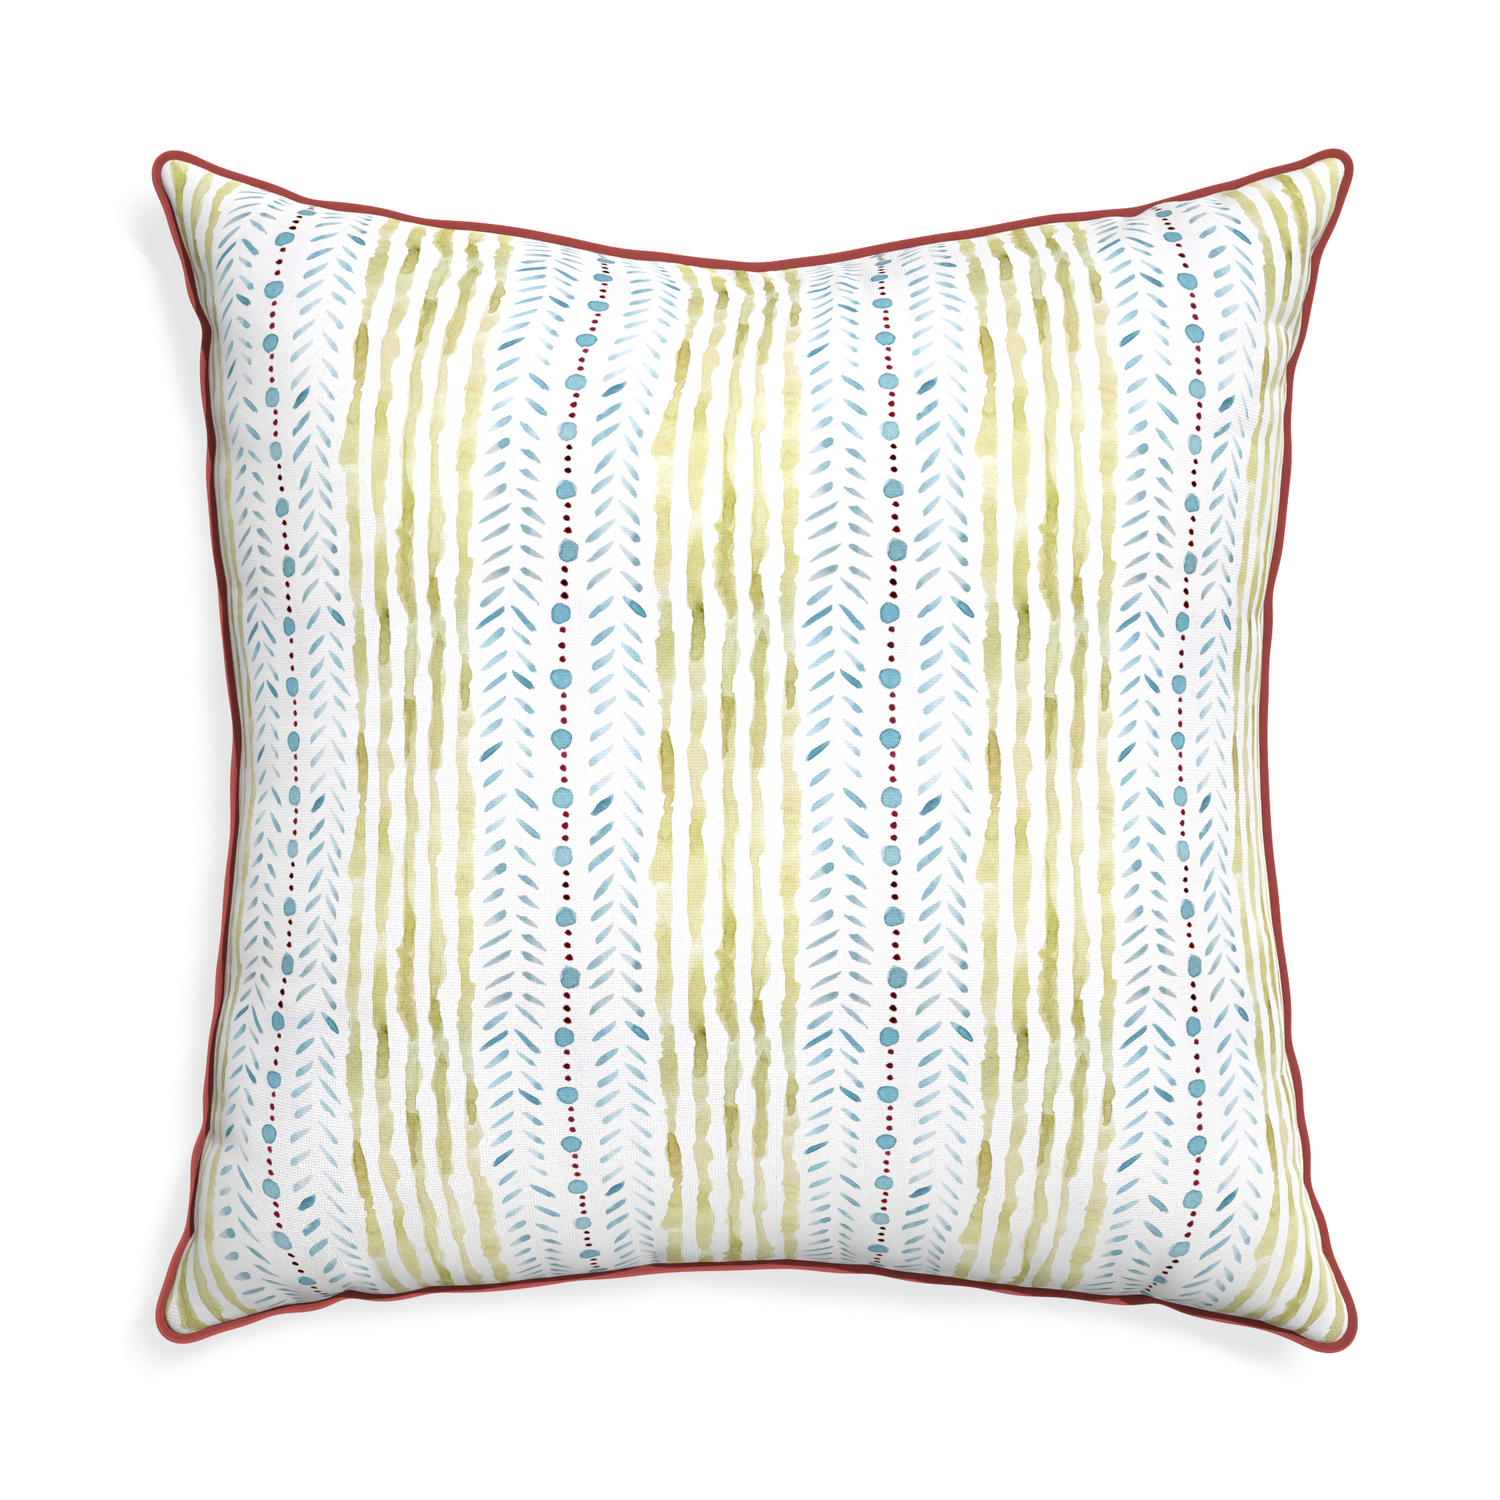 Euro-sham julia custom pillow with c piping on white background